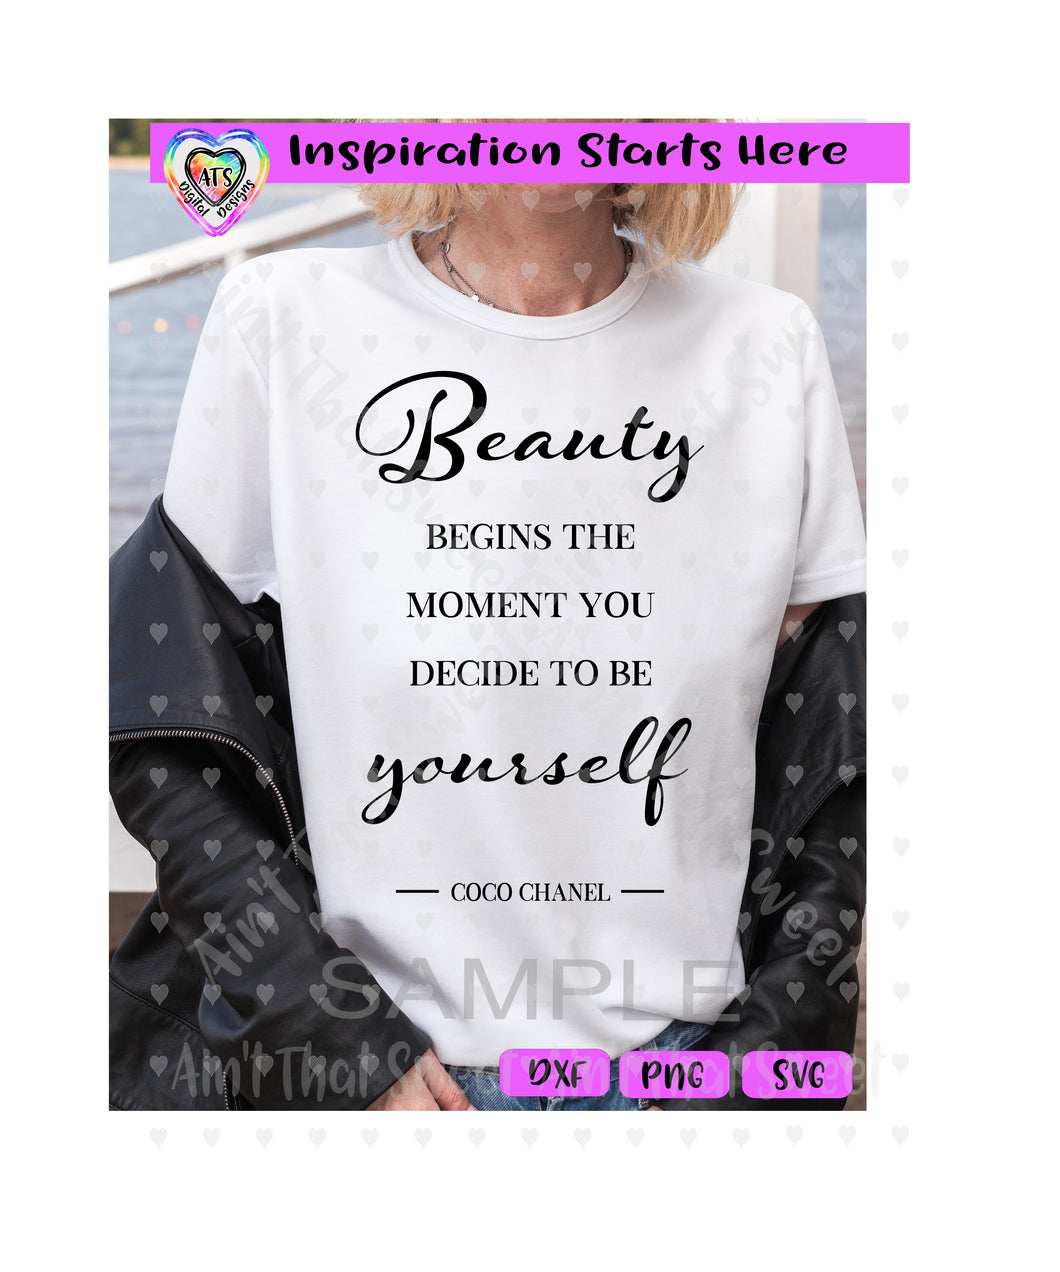 Beauty Begins The Moment You Decide To Be Yourself | Coco Chanel - Transparent PNG SVG DXF - Silhouette, Cricut, ScanNCut